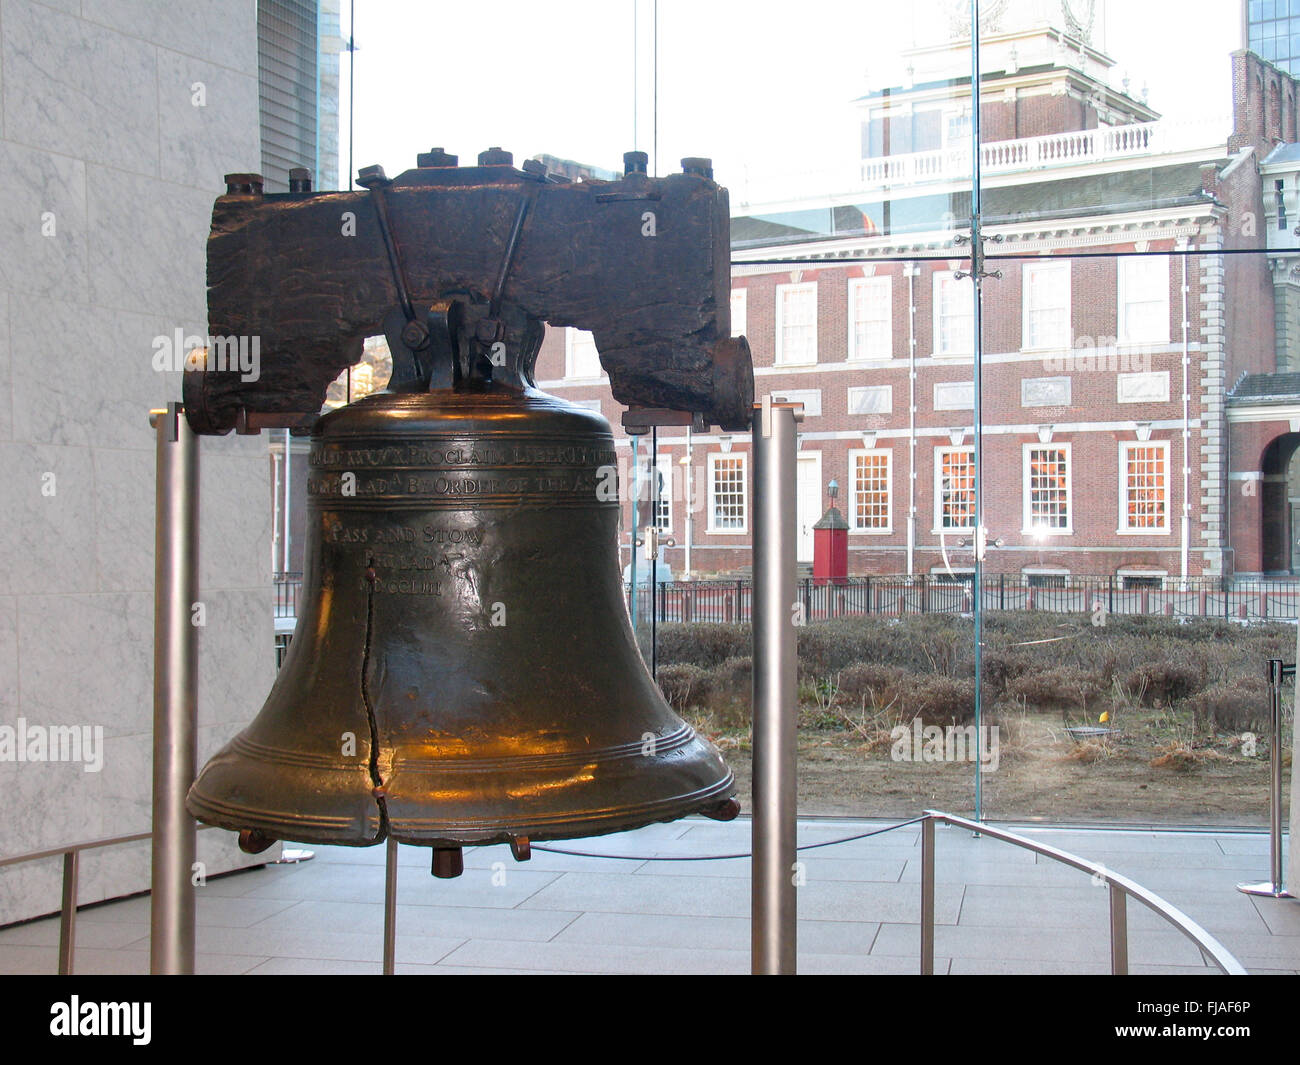 The Liberty Bell, located in the Liberty Bell Center, Philadelphia. Stock Photo